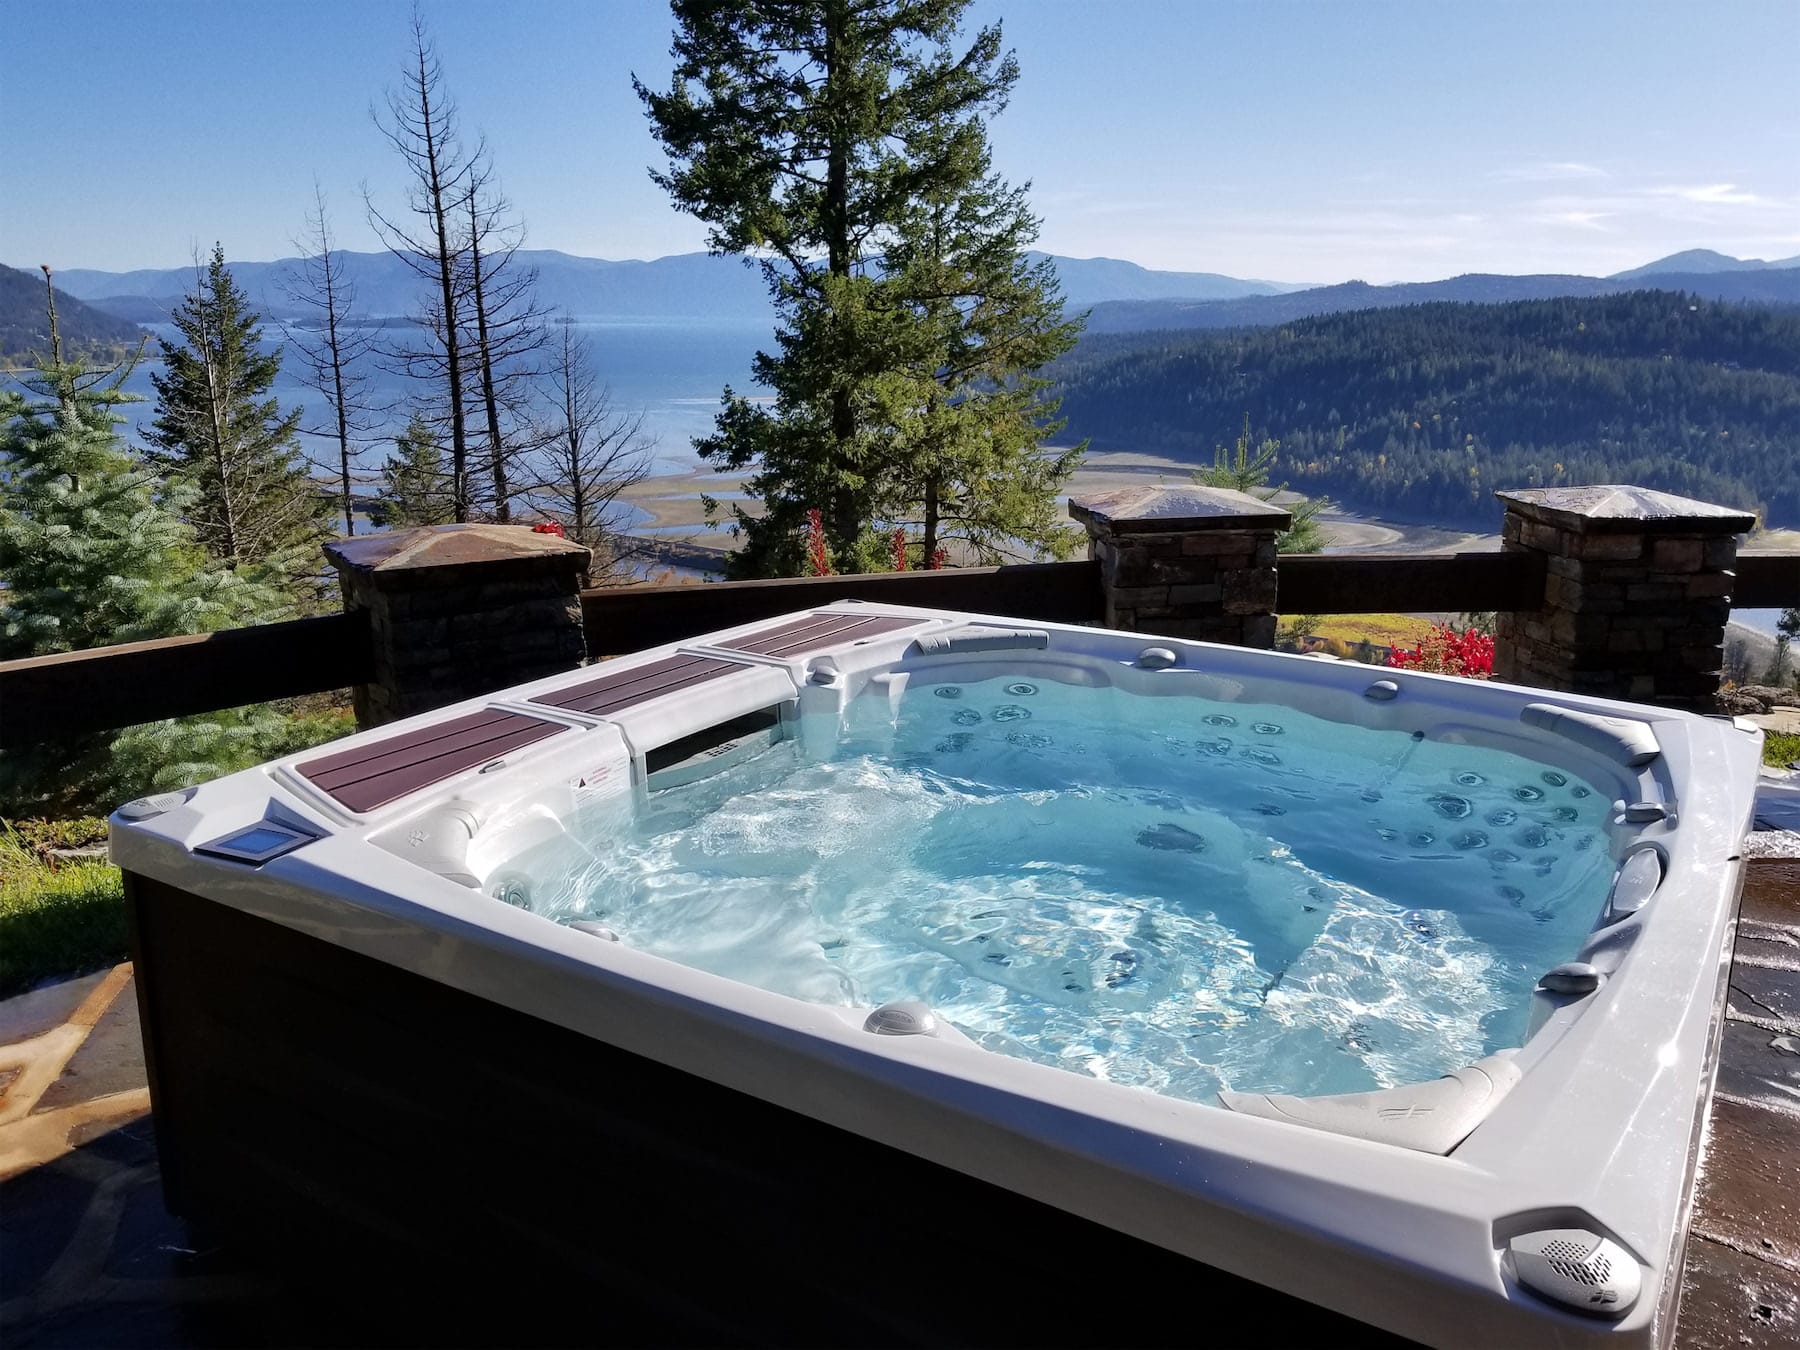 Top 3 Hot Tub Features That Every Spa Should Have